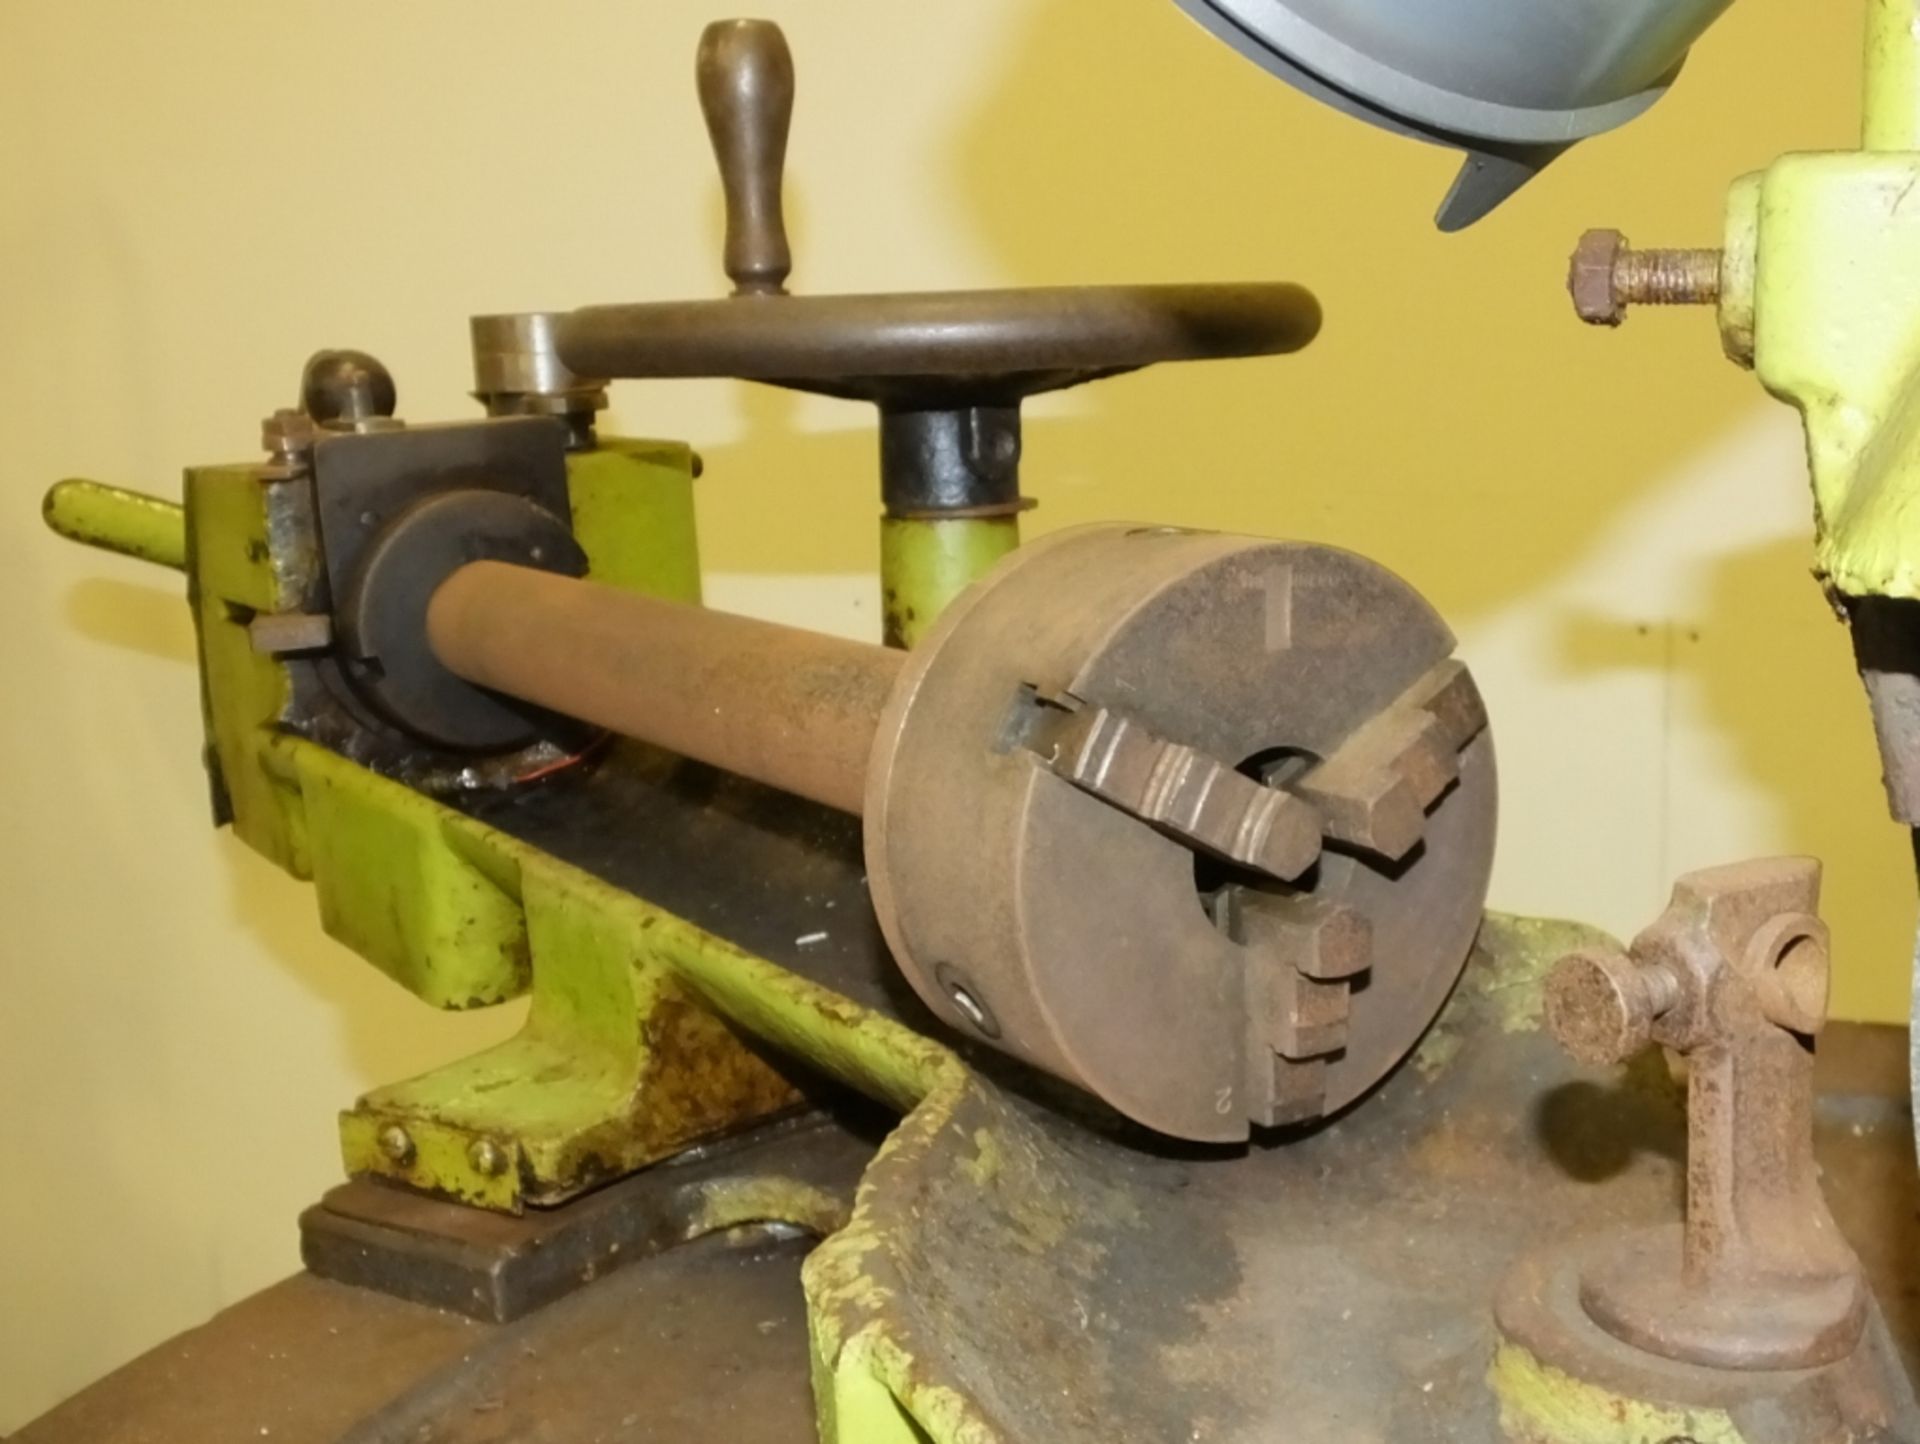 Herbert Hunt & Sons Drill Sharpening Machine - £5 Loading Charge Applied to this lot - Image 3 of 6